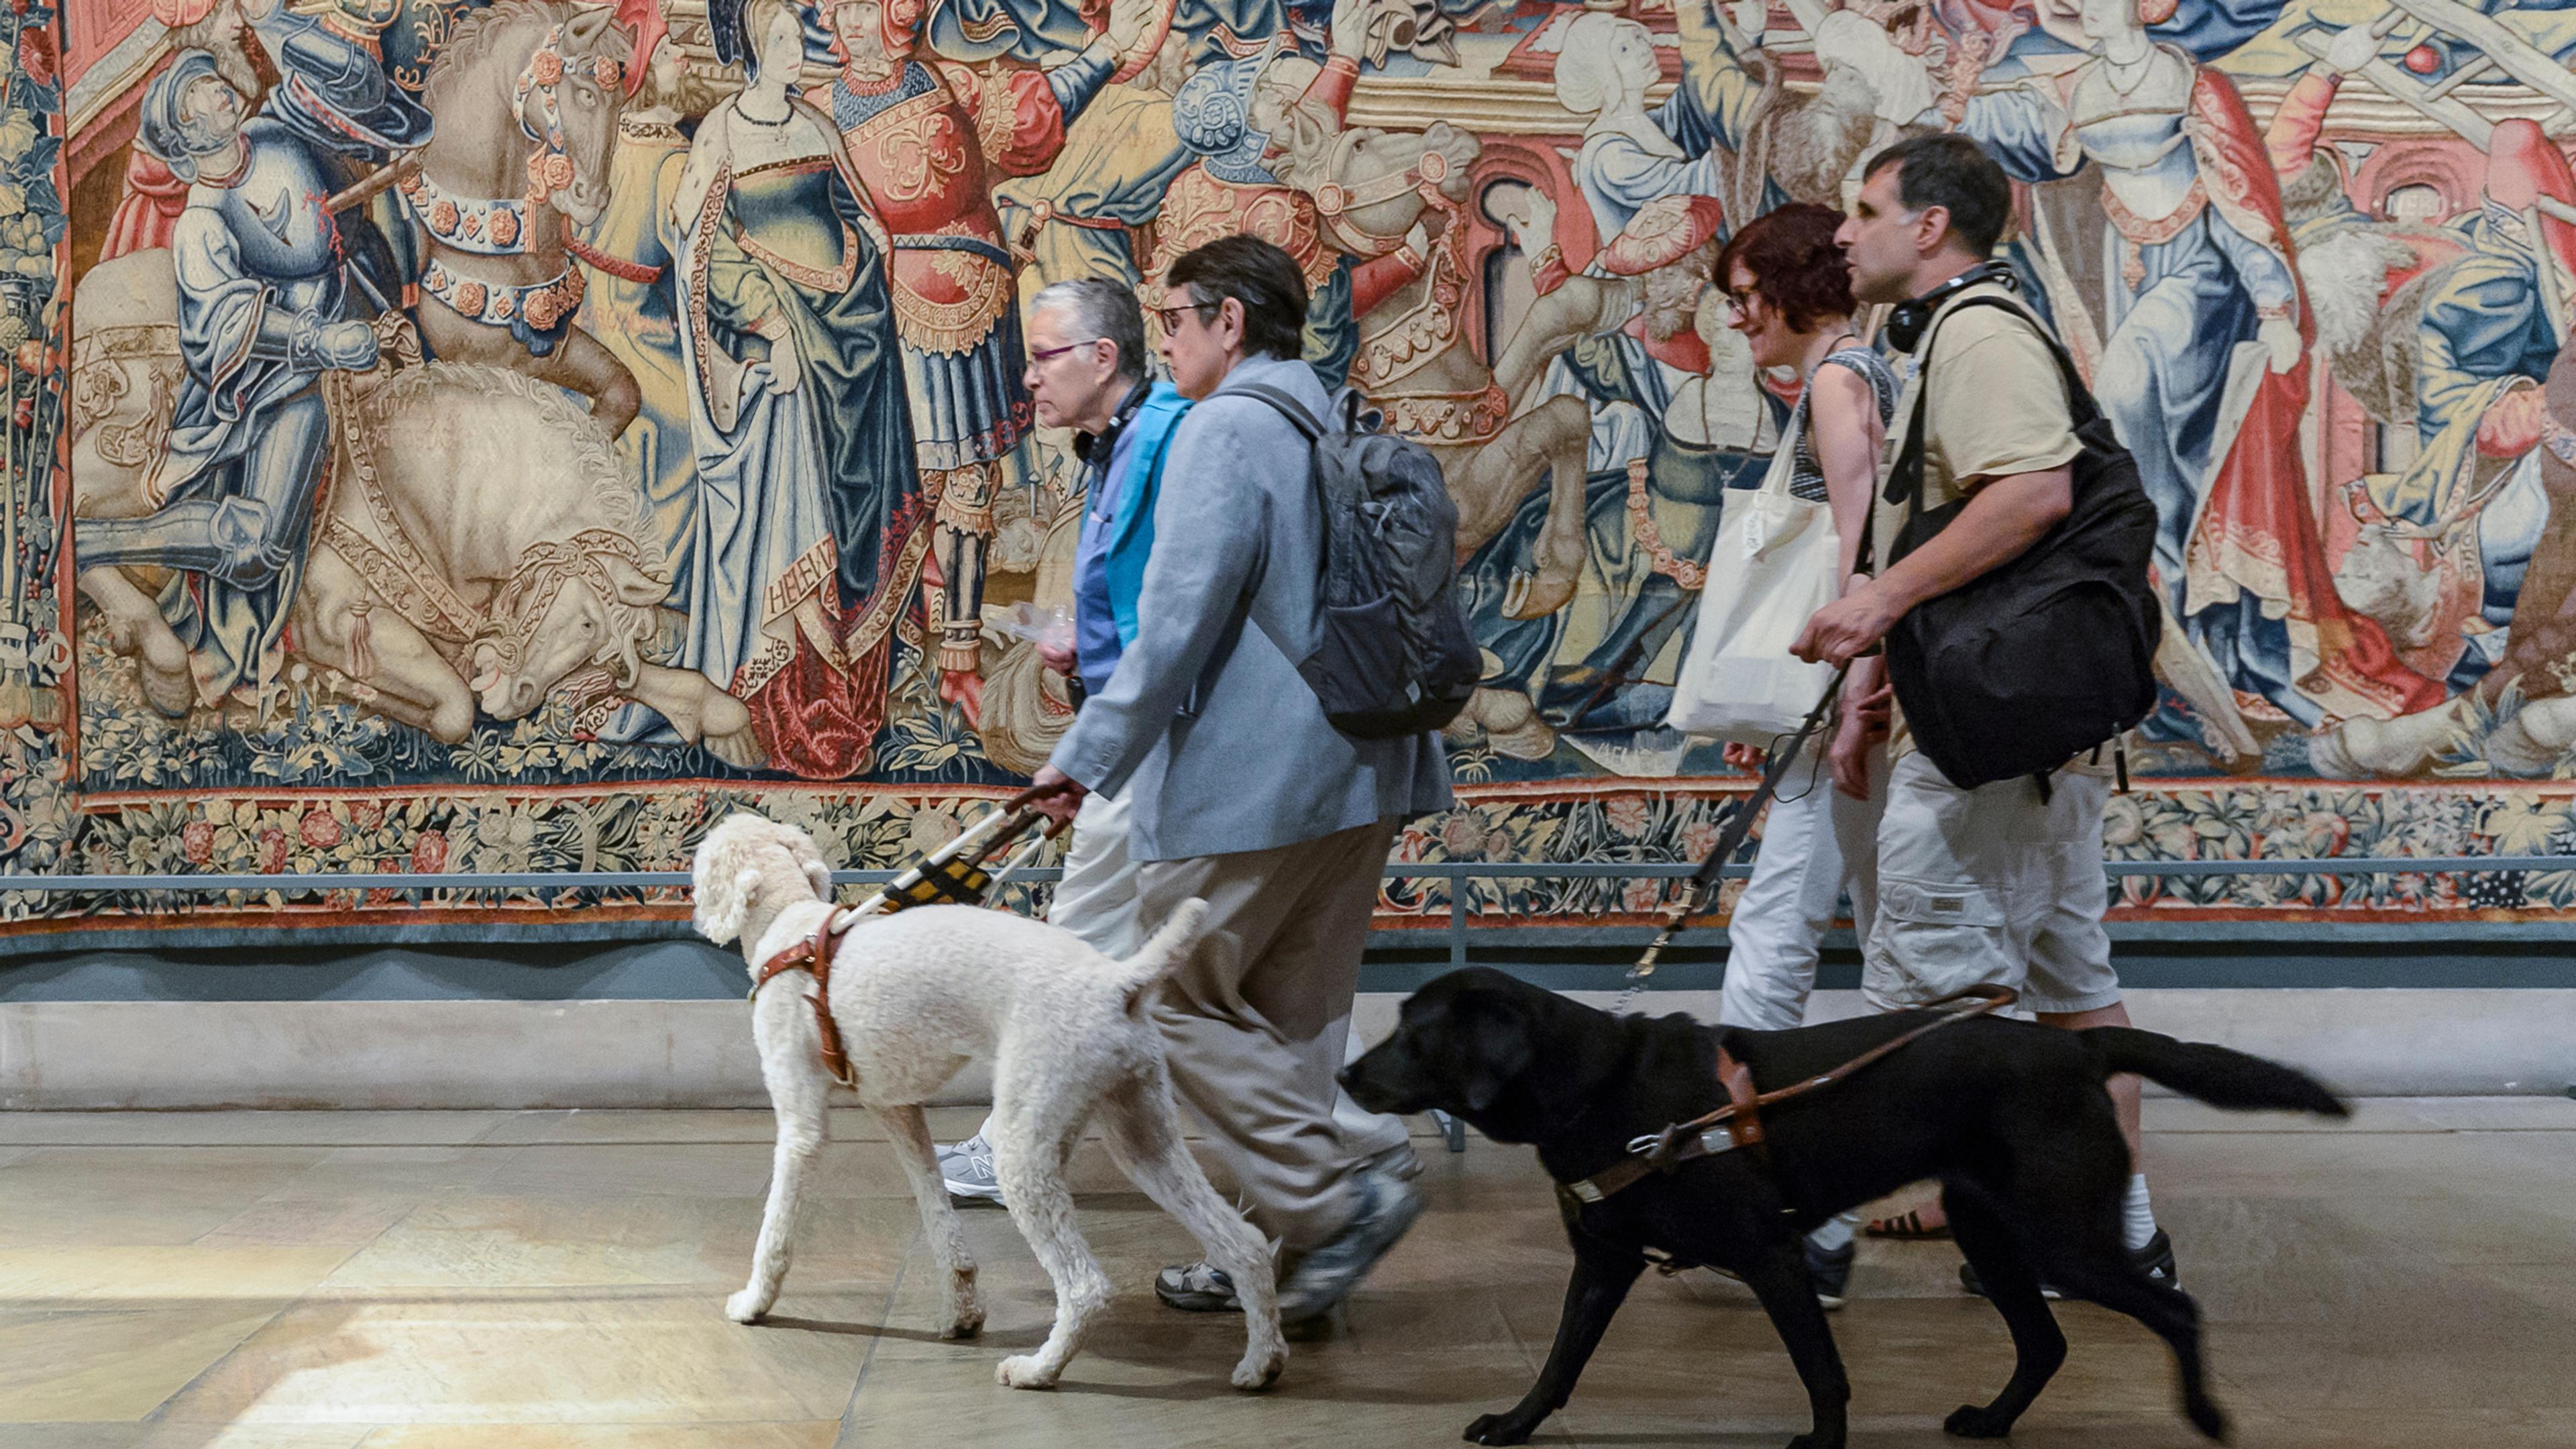 Group of visitors with disabilities walking with guide dogs in front of a large tapestry.